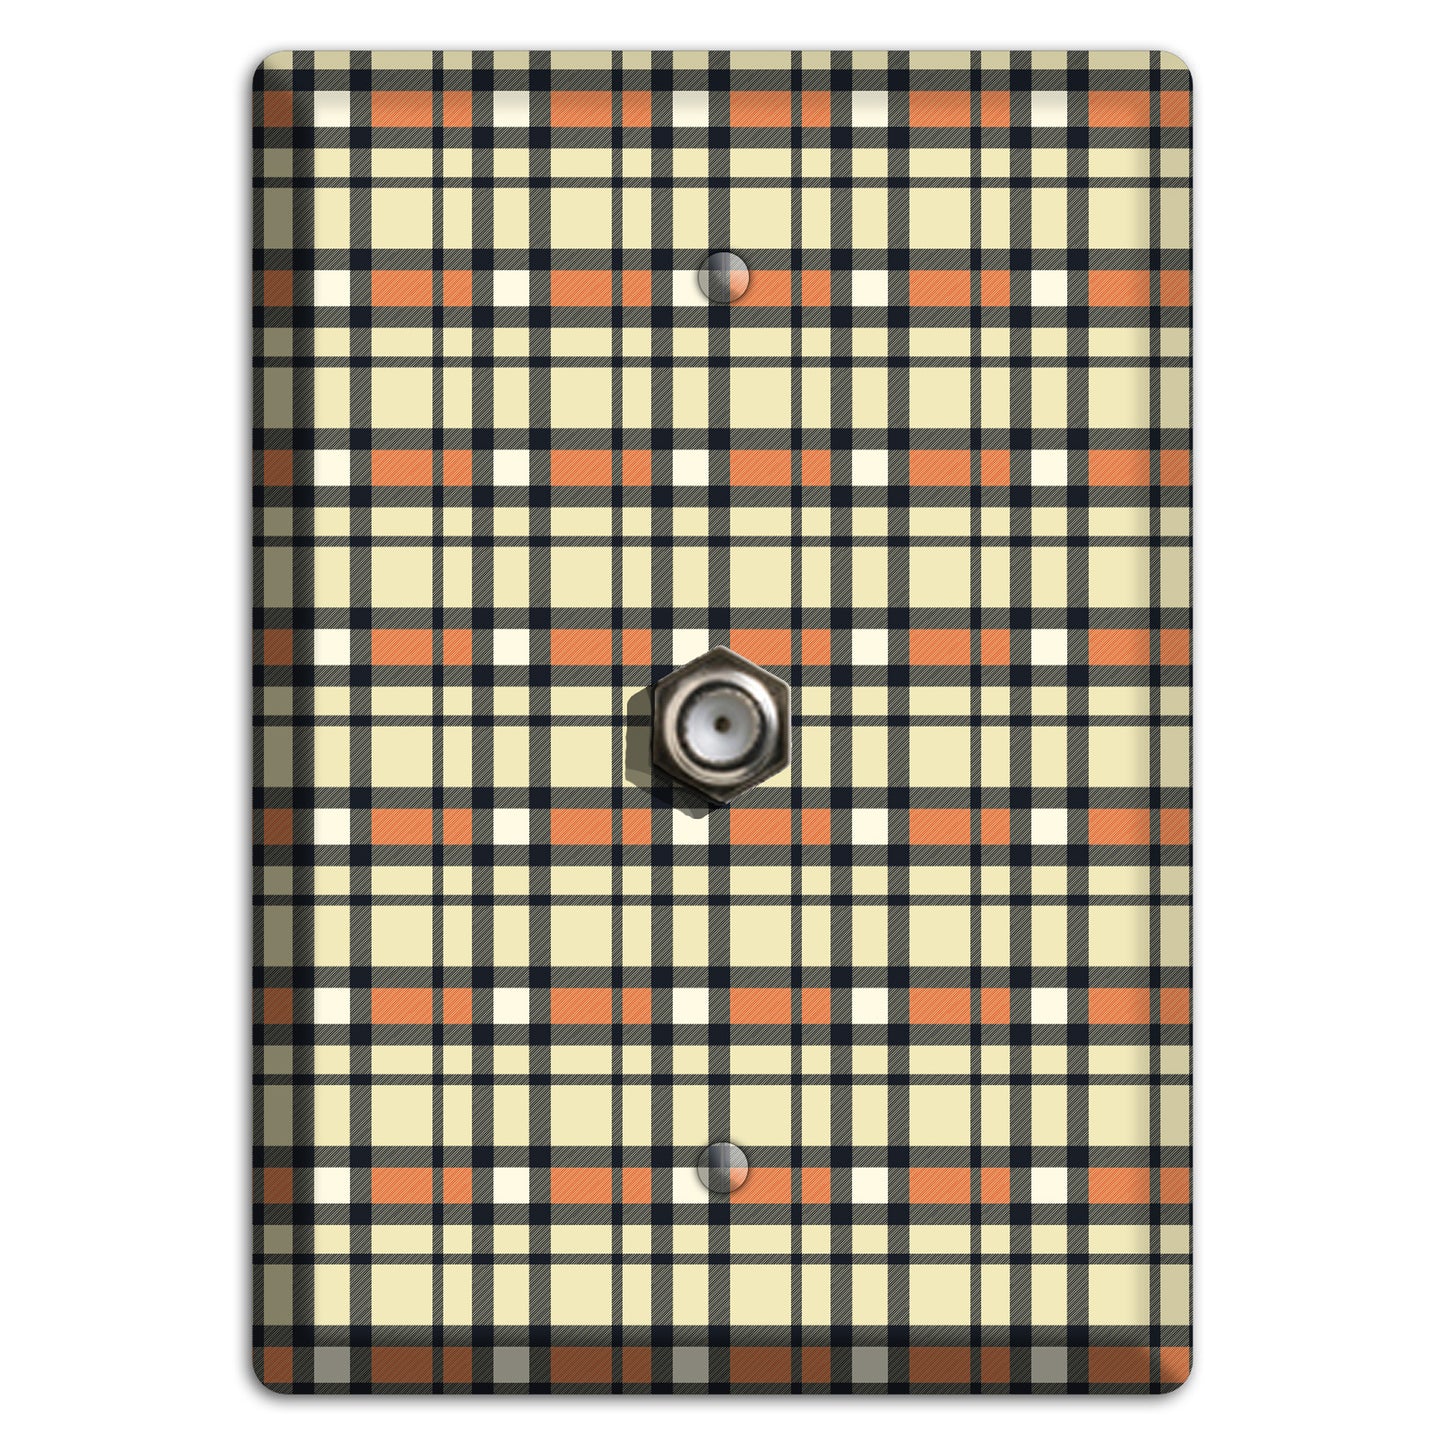 Beige and Brown Plaid Cable Wallplate